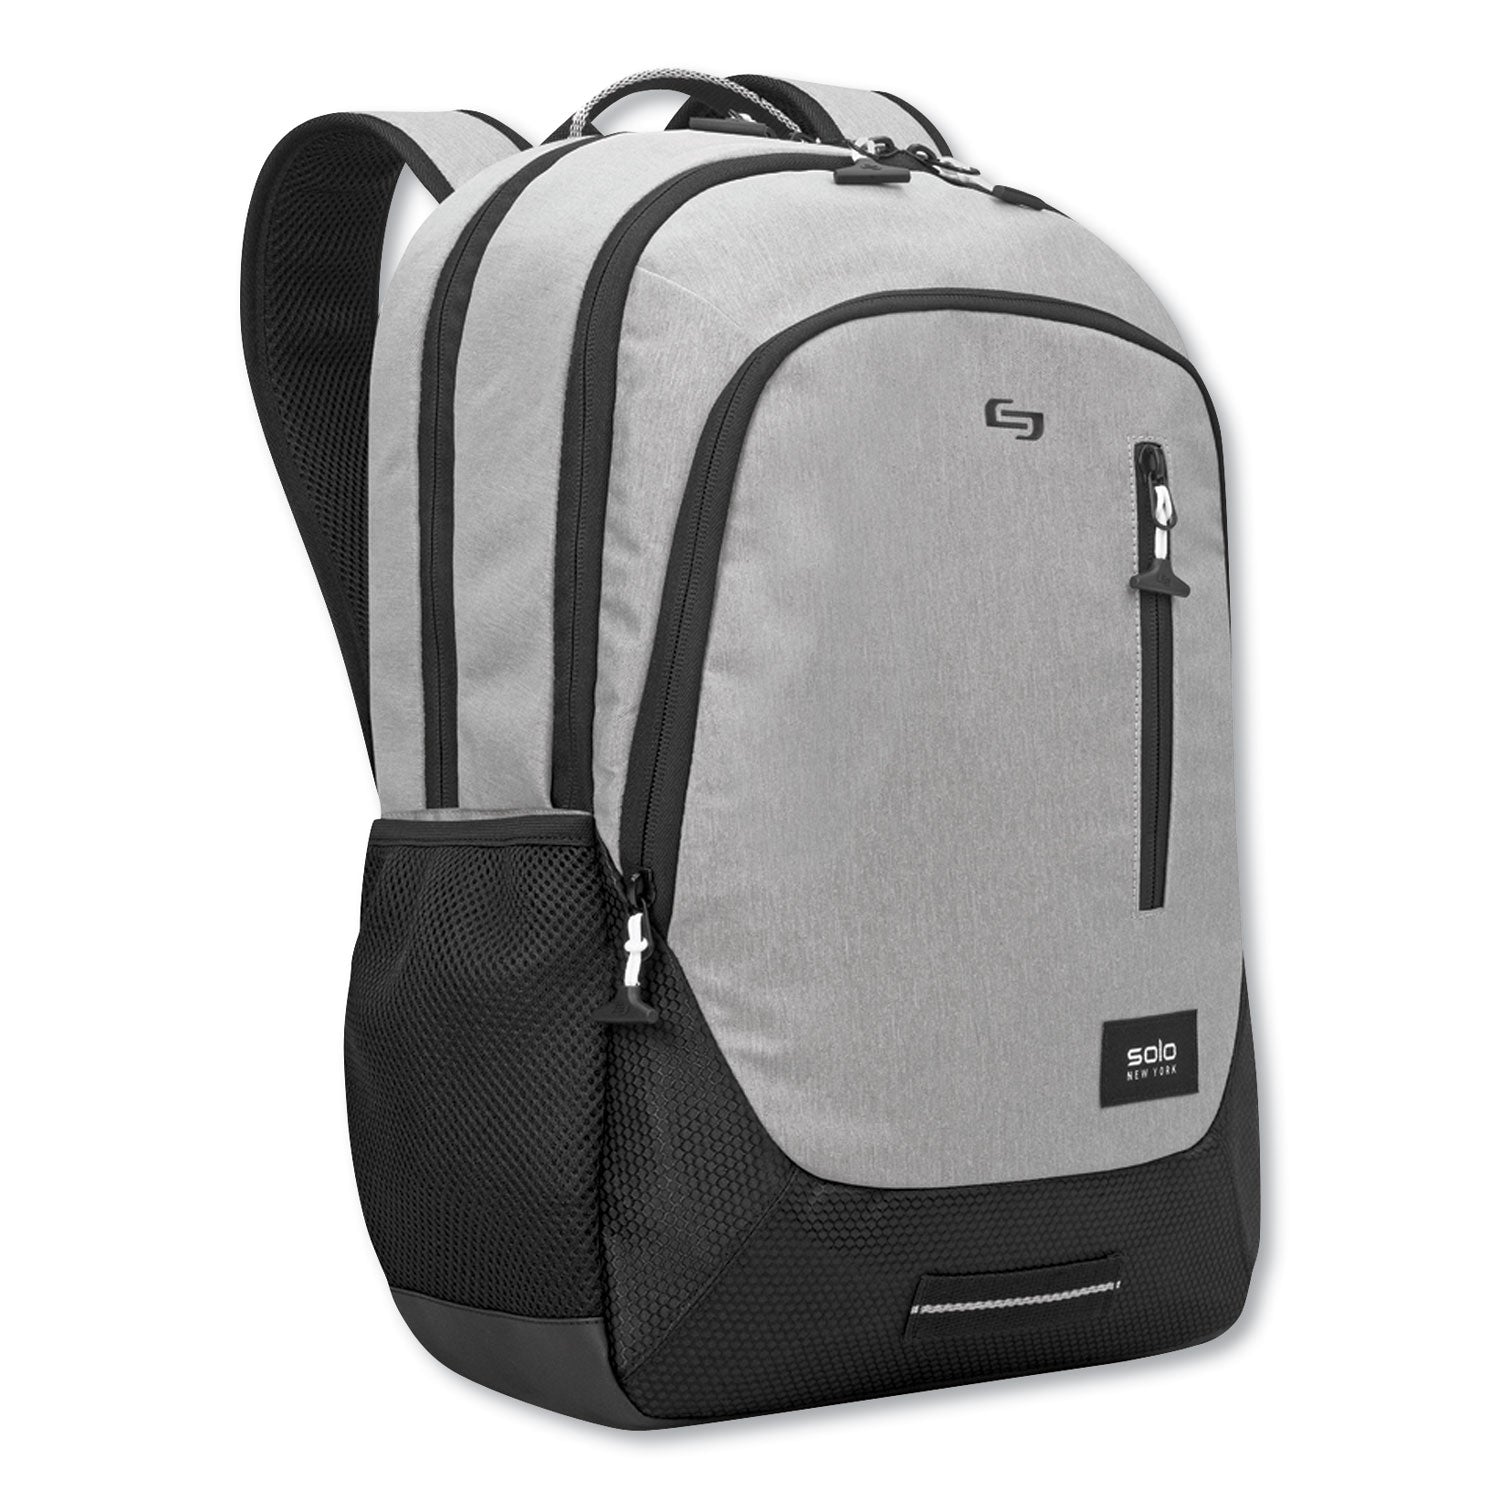 region-backpack-fits-devices-up-to-156-nylon-polyester-13-x-5-x-19-light-gray_uslvar70410 - 2